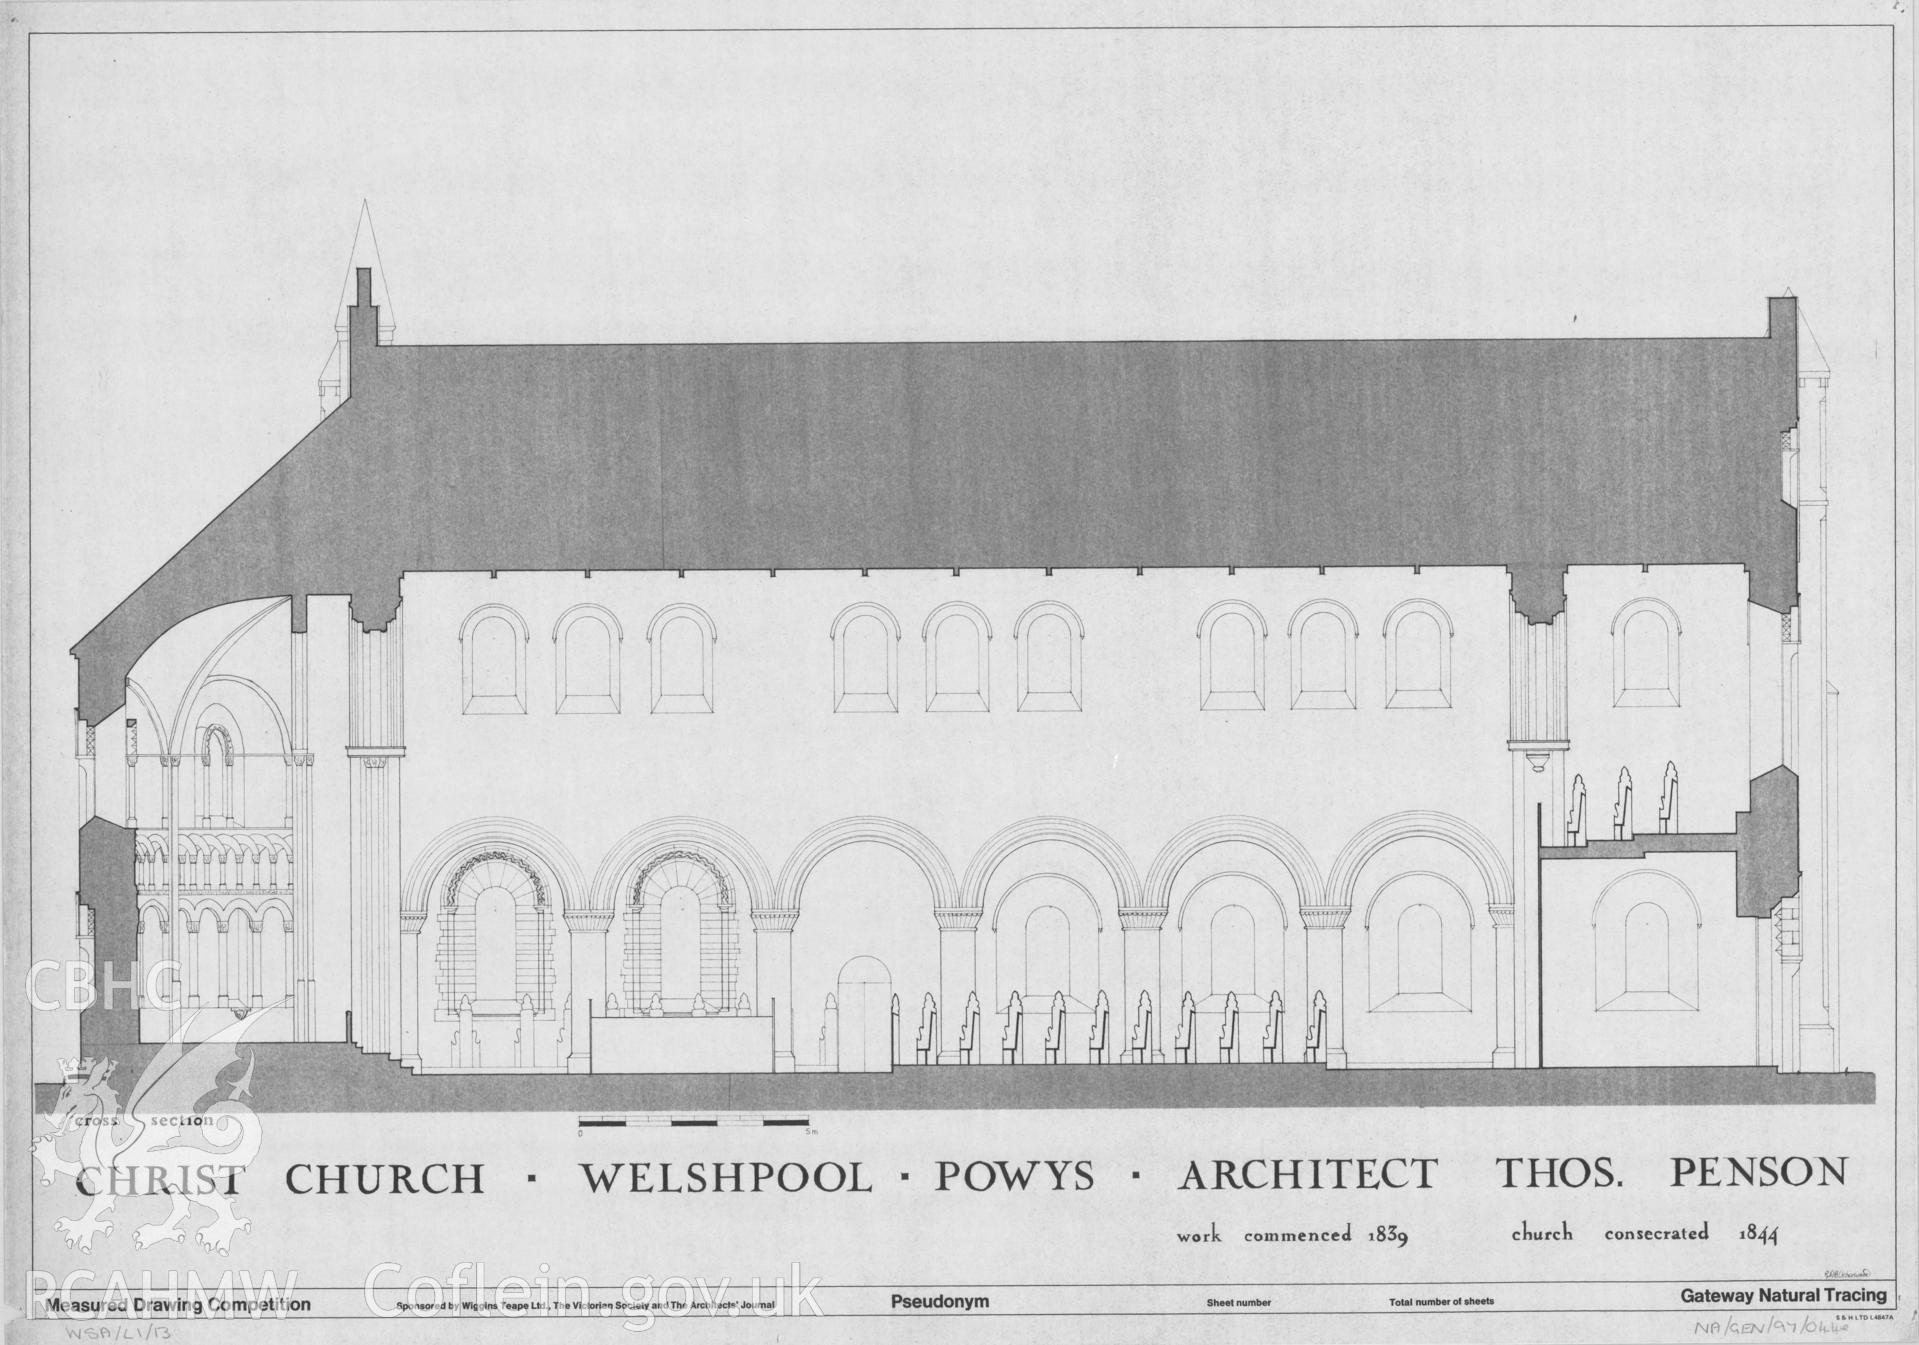 Measured drawing showing cross section view of Christ Church, Welshpool, produced by G. Usherwood, 1978